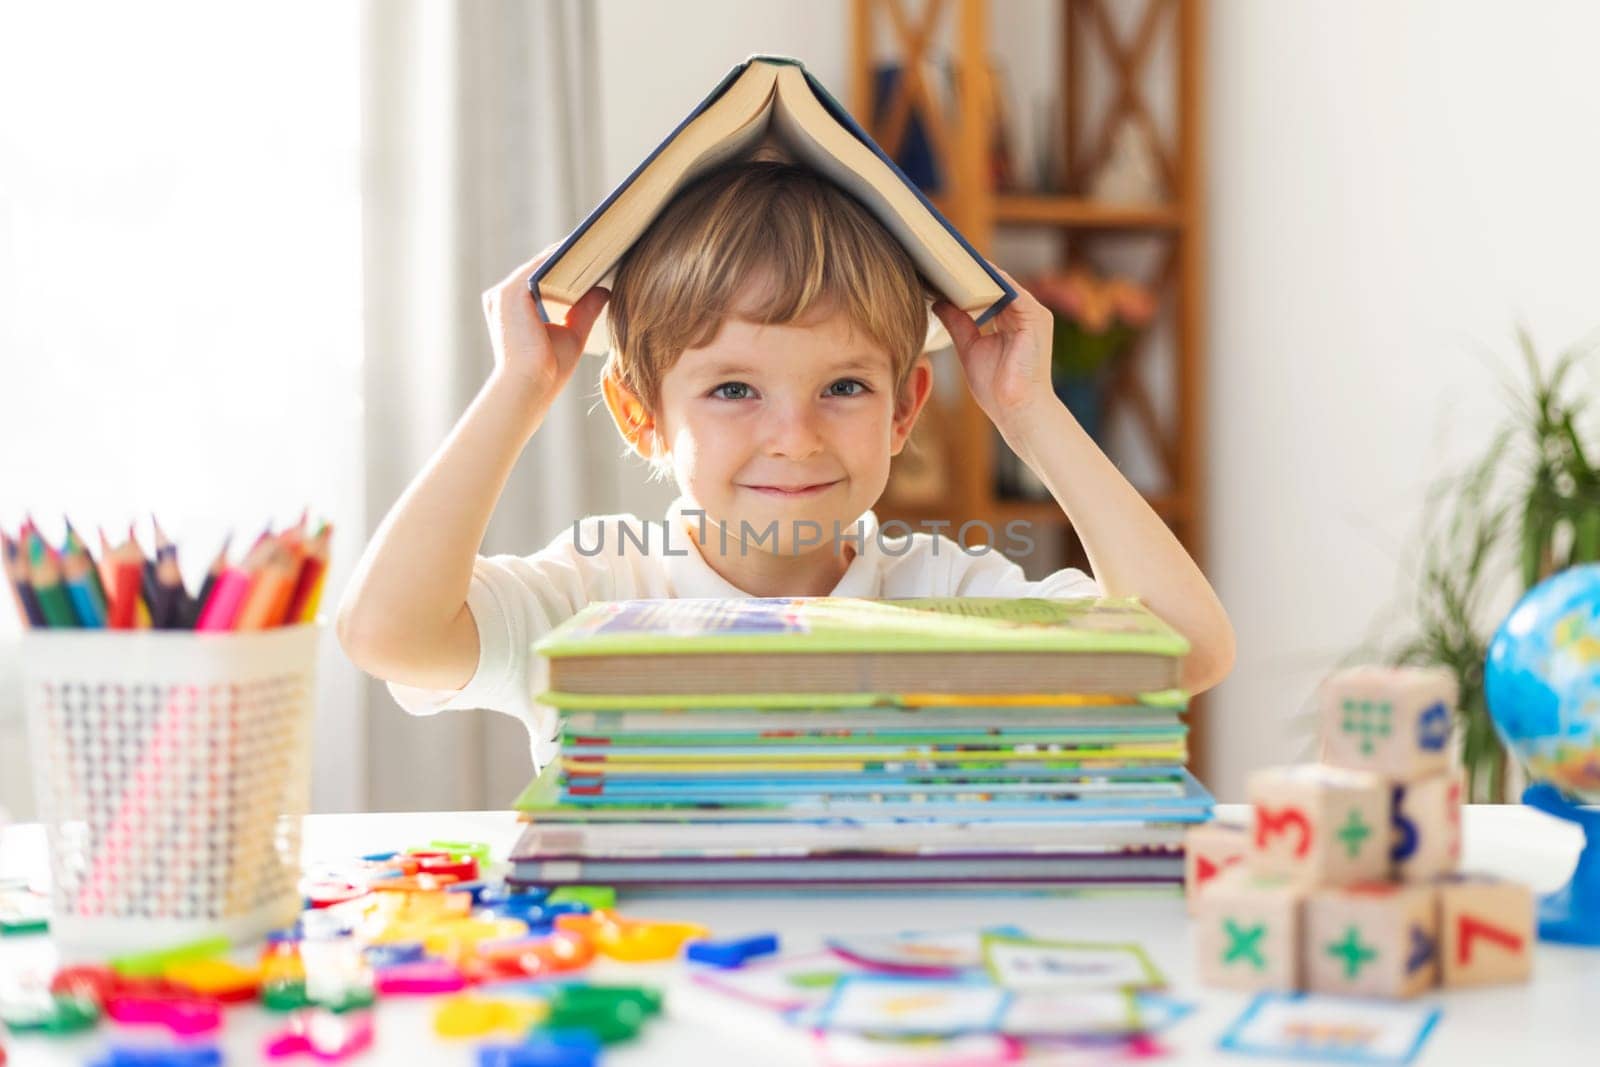 Boy with book on head at home learning space. Creativity and playful learning concept. Design for poster, educational material, banner.